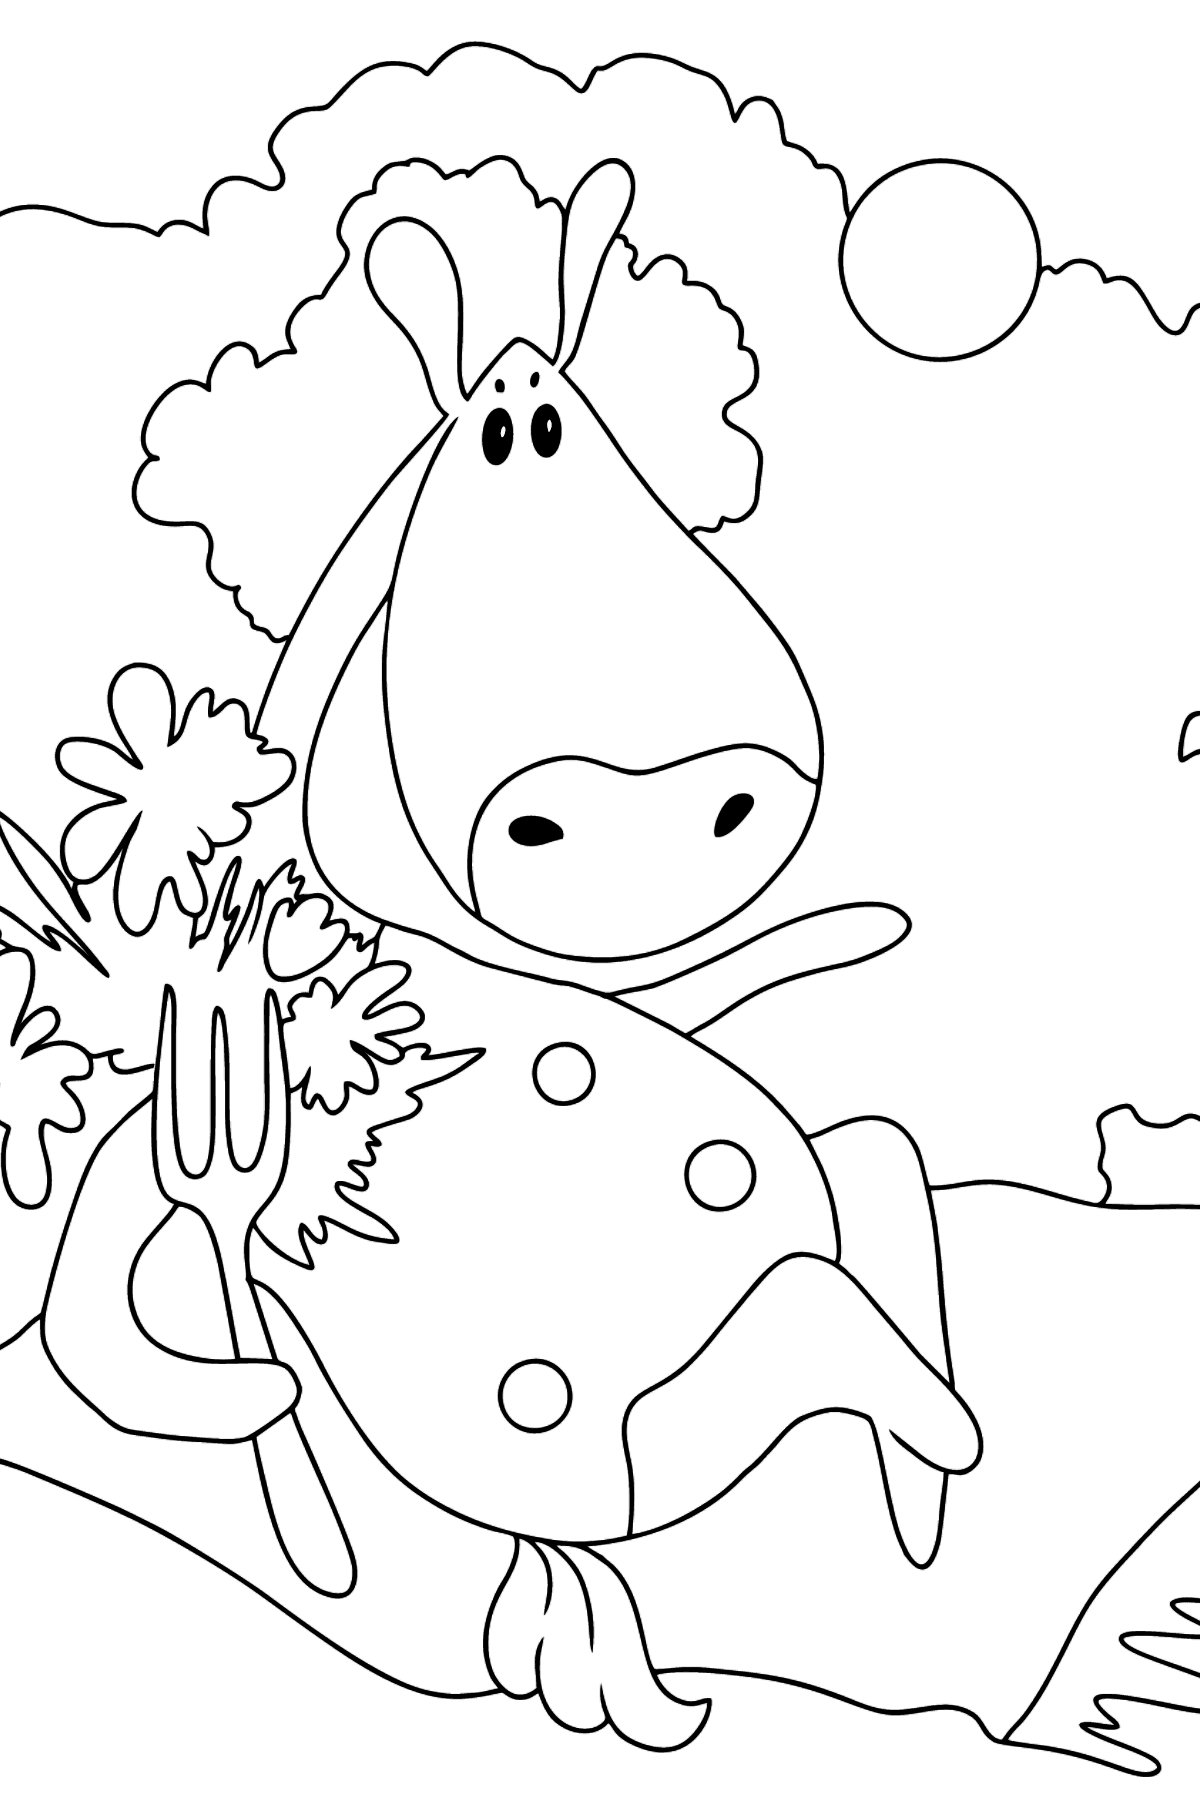 Coloring page magic horse - Coloring Pages for Kids